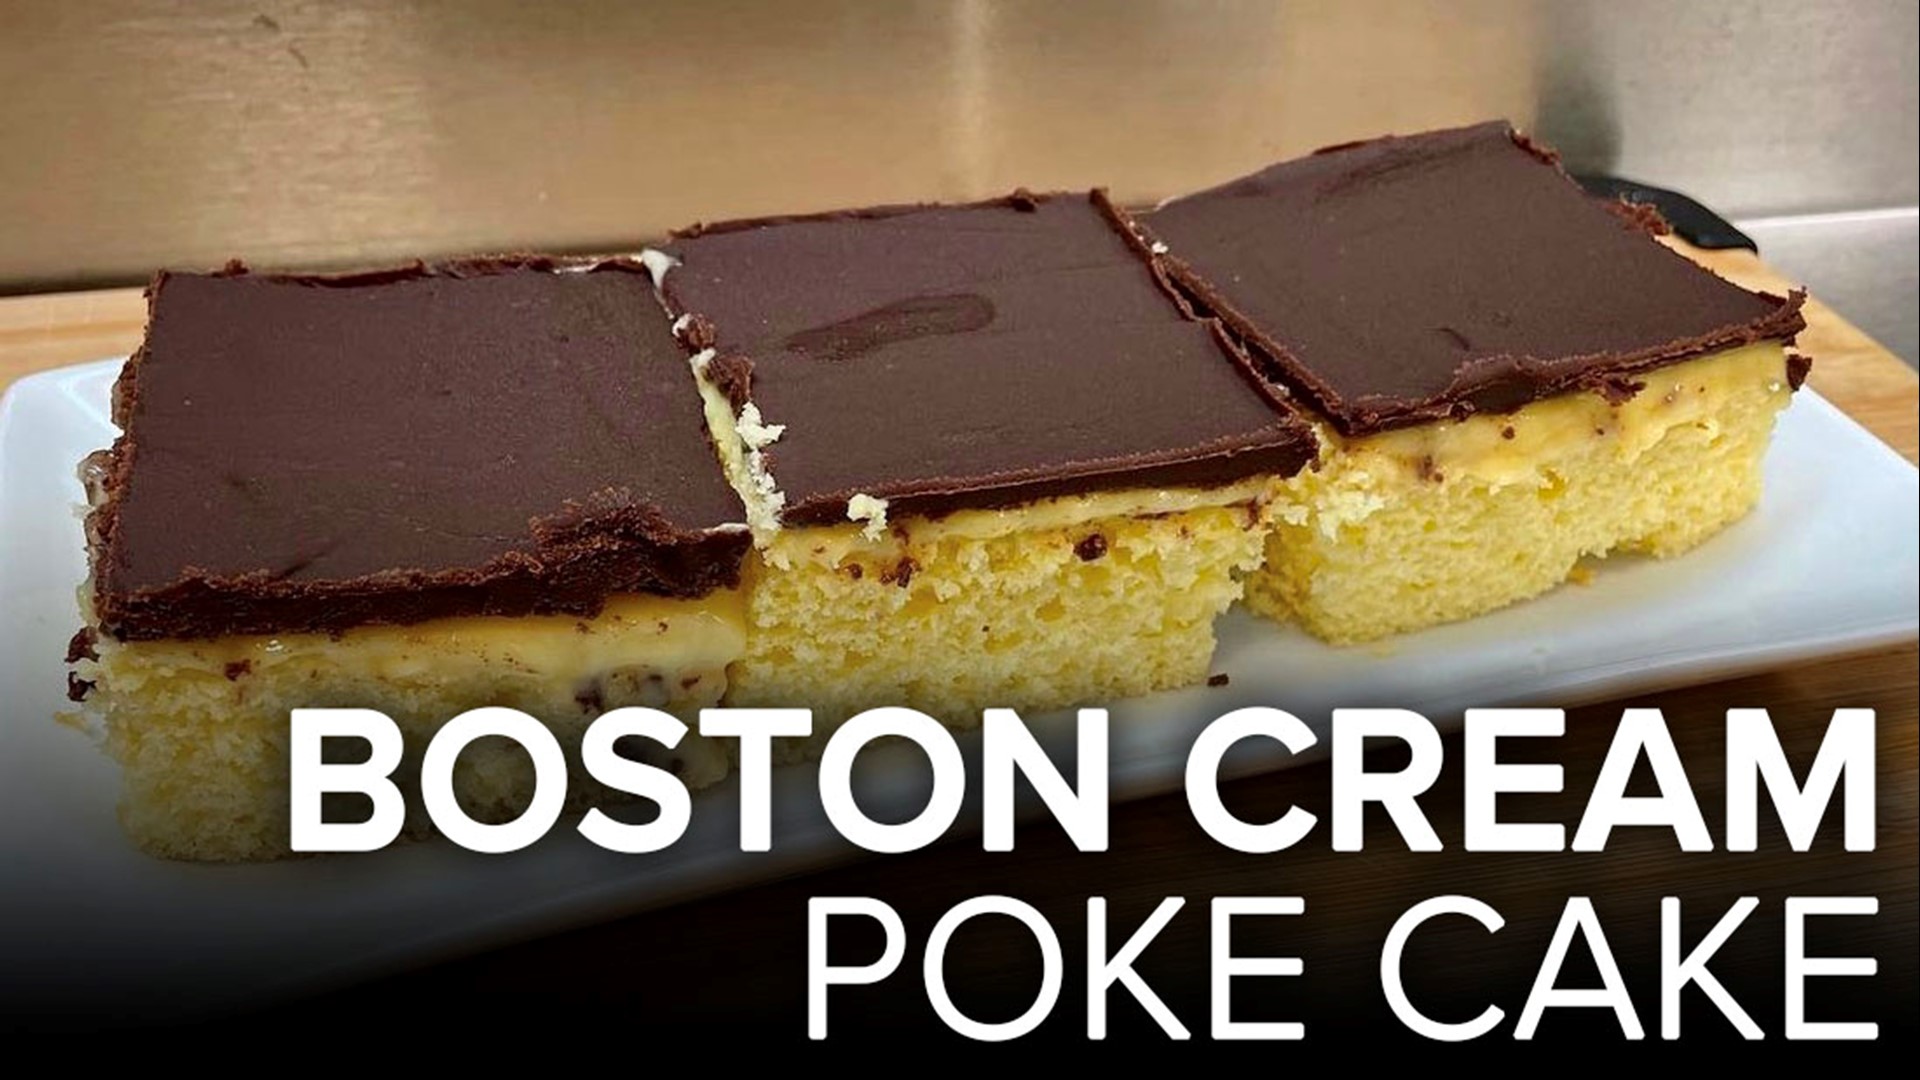 It's National Boston Cream Pie Day! I'm putting my spin on it with a Boston cream pie cake that's perfect to make with the kids.